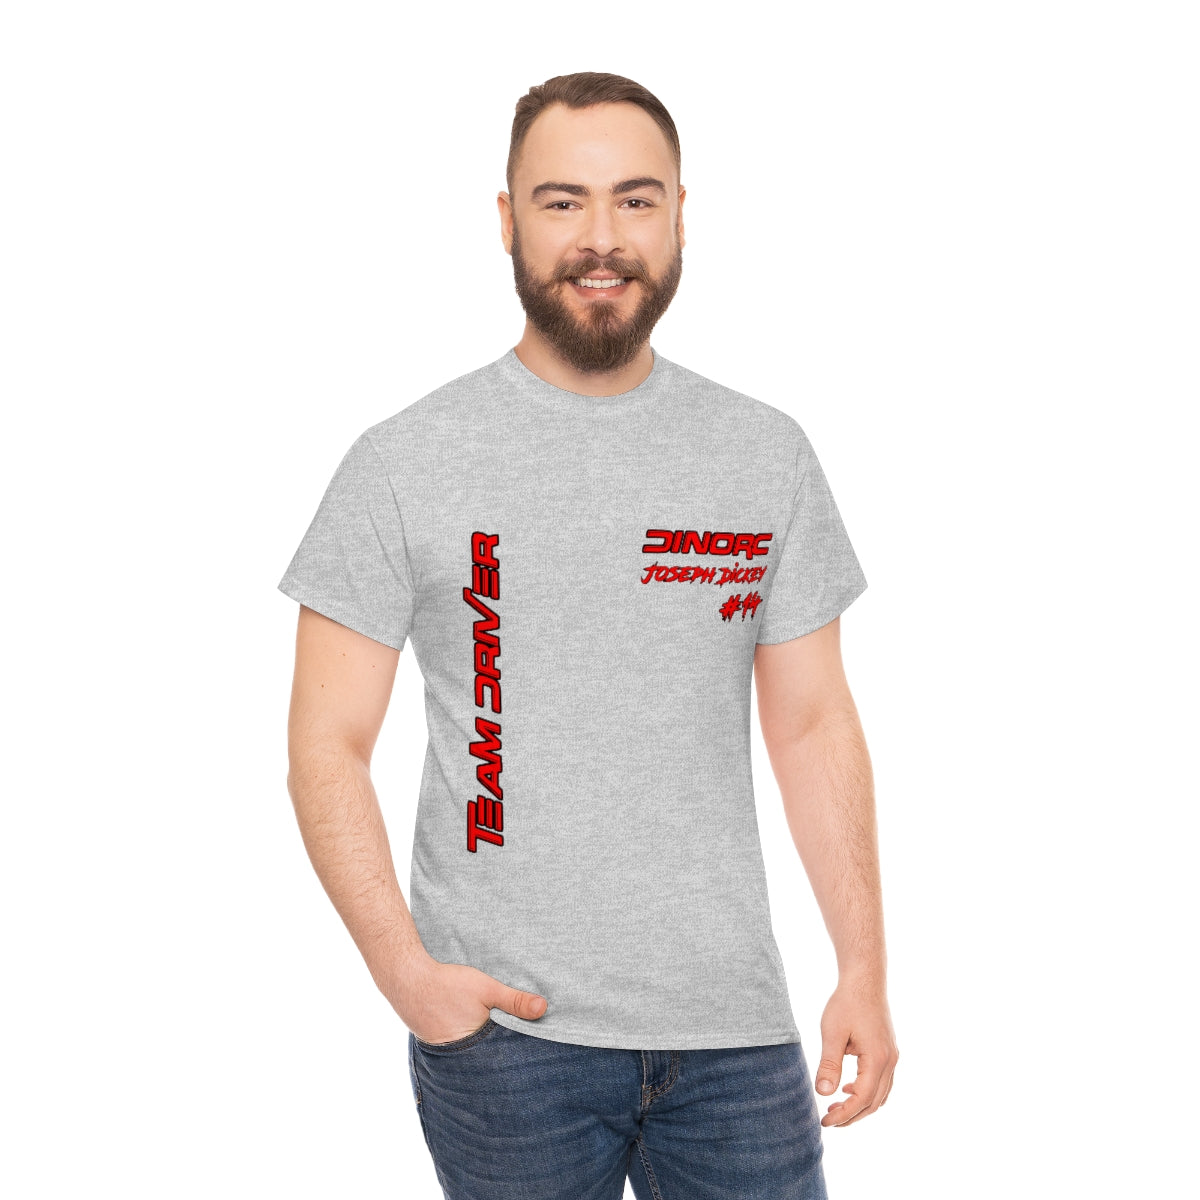 Team Driver Joseph Dickey Front and Back DinoRc Logo T-Shirt S-5x 5 colors